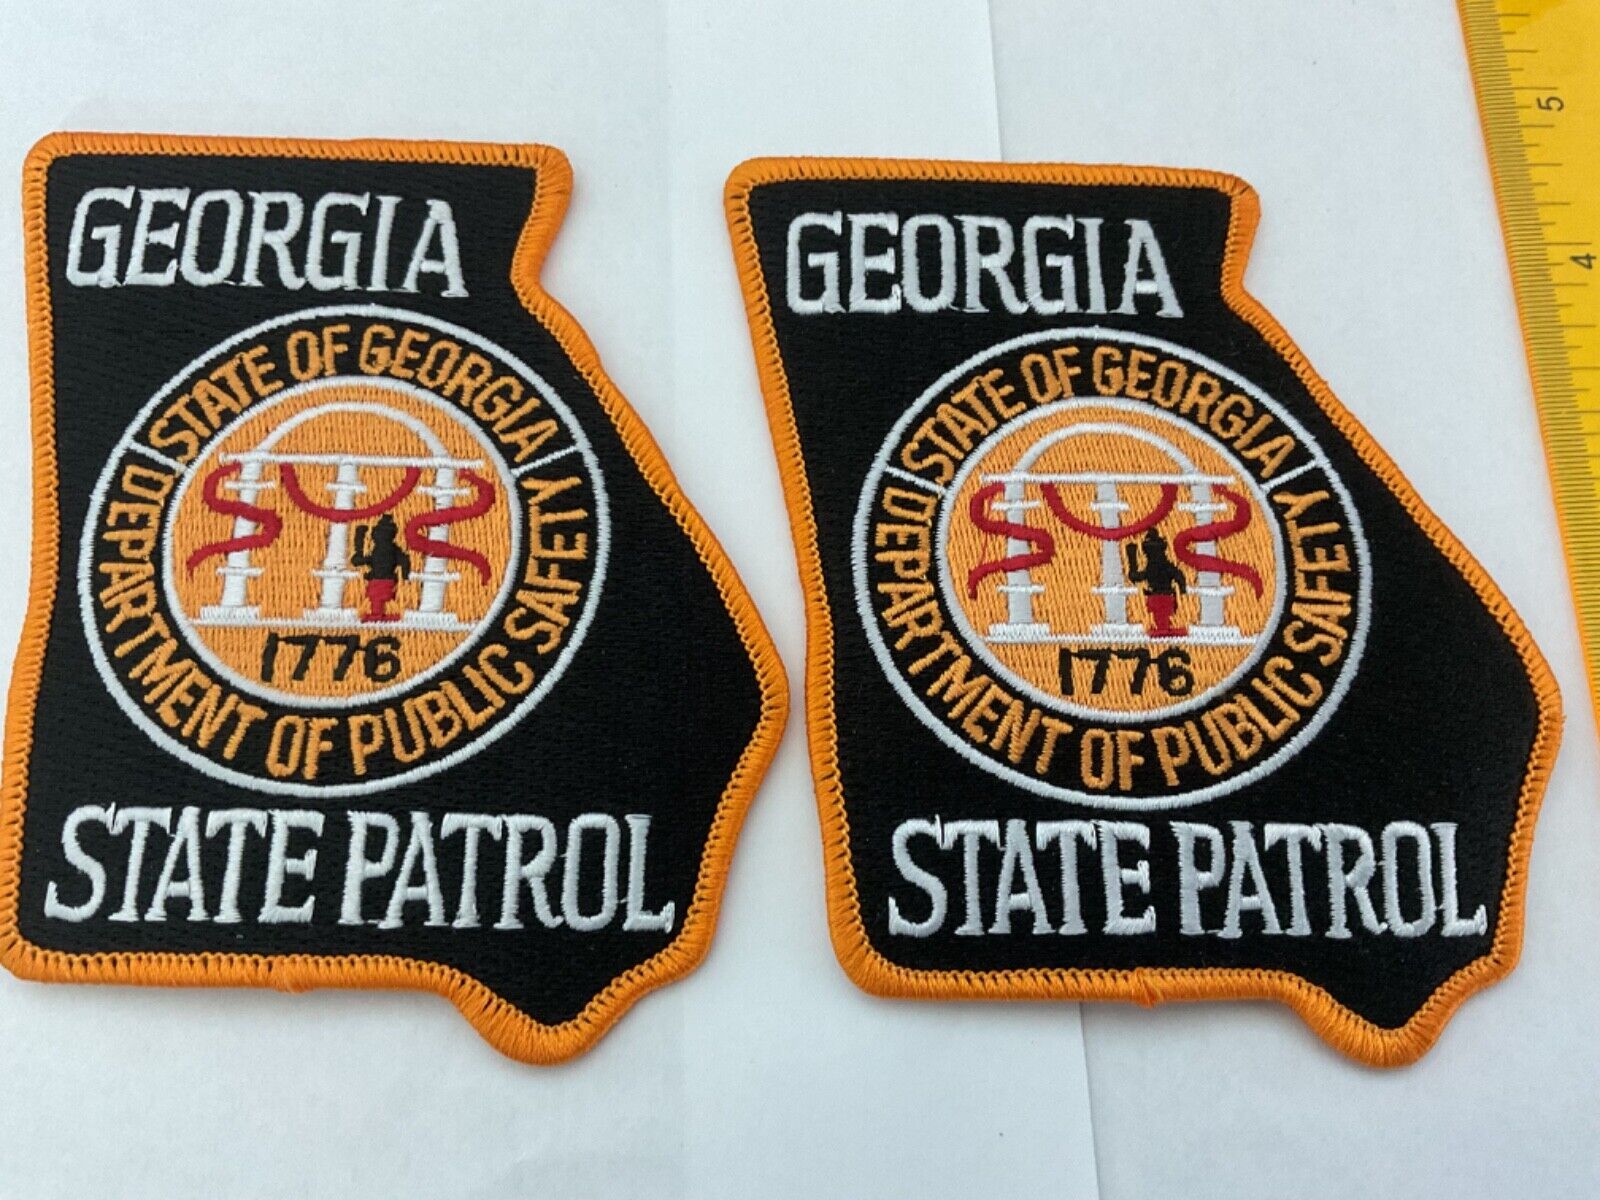 Georgia State Patrol collectable Patch Set 2 pieces